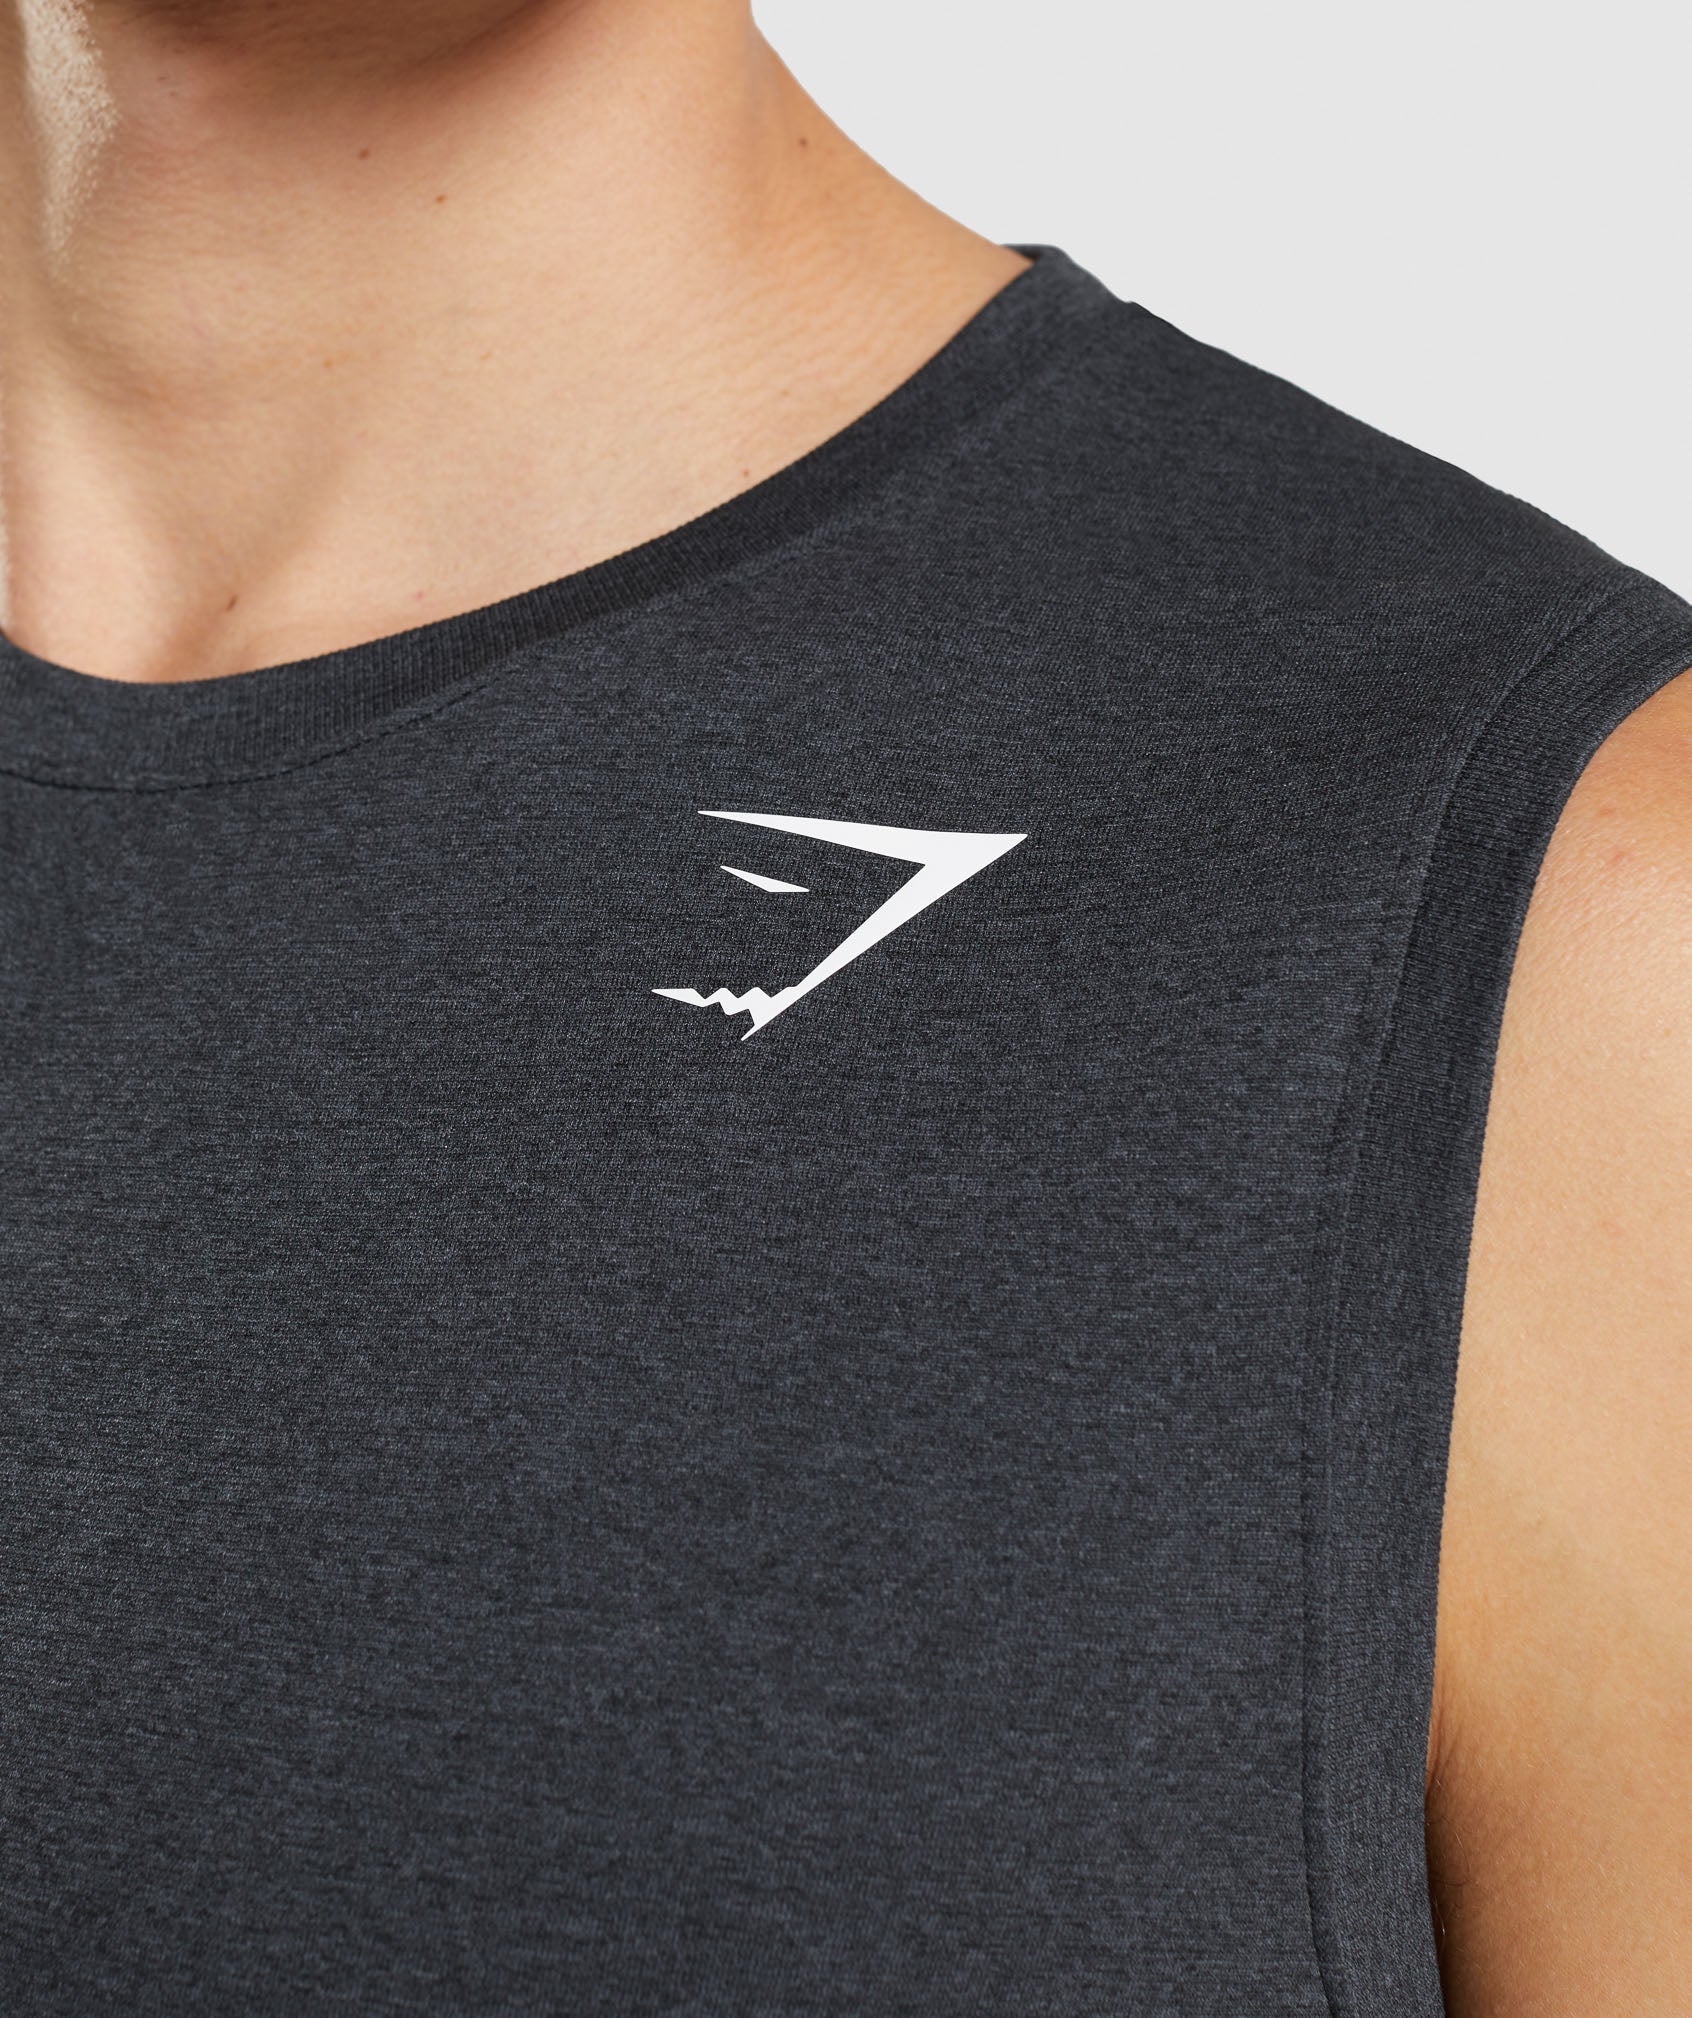 Arrival Seamless Tank in Black Marl - view 6